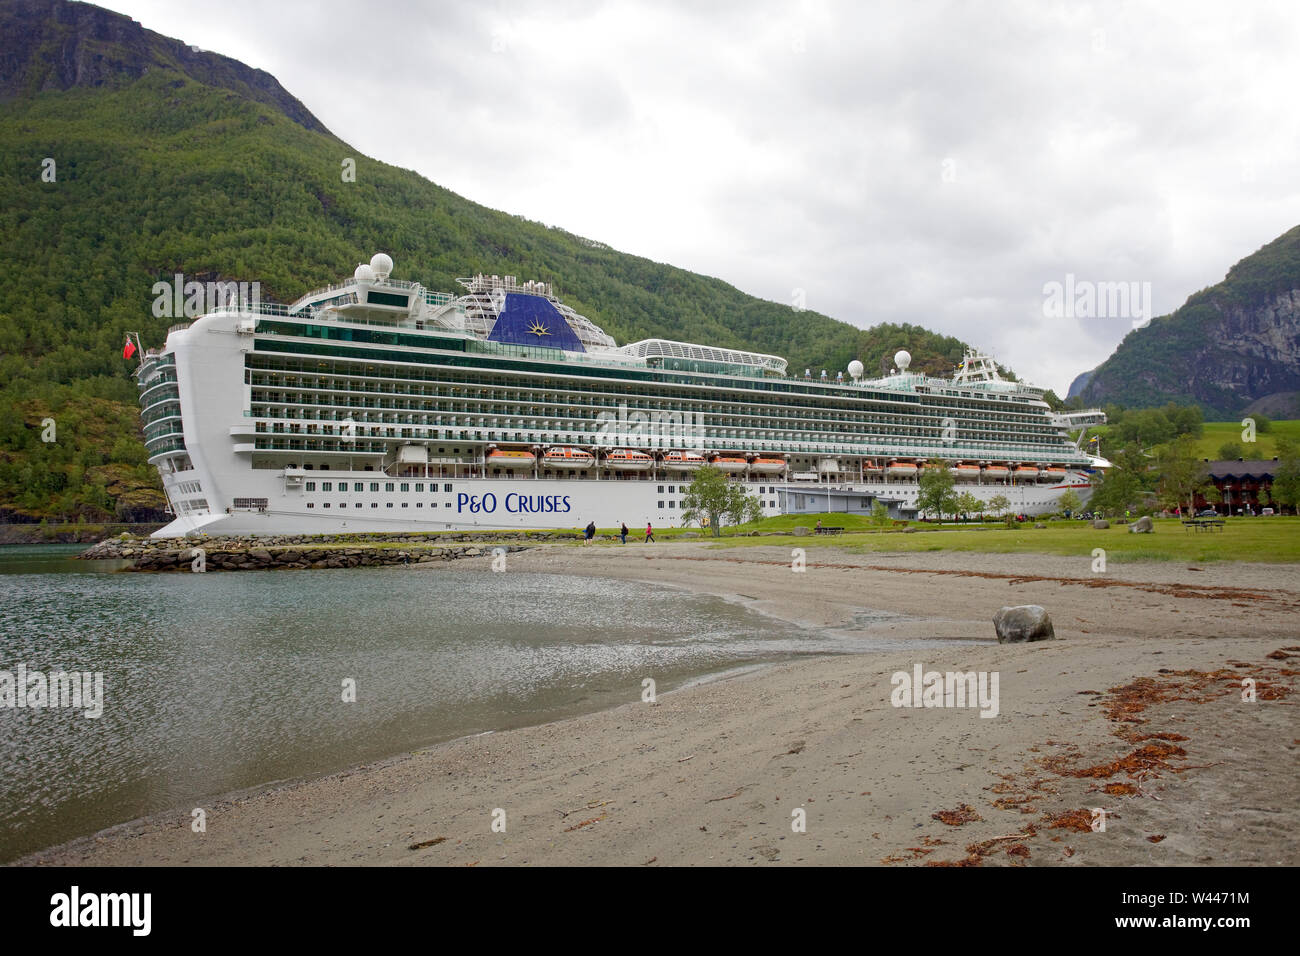 P&O Cruise ship Azura docked in the port of Flam, Norway Stock Photo